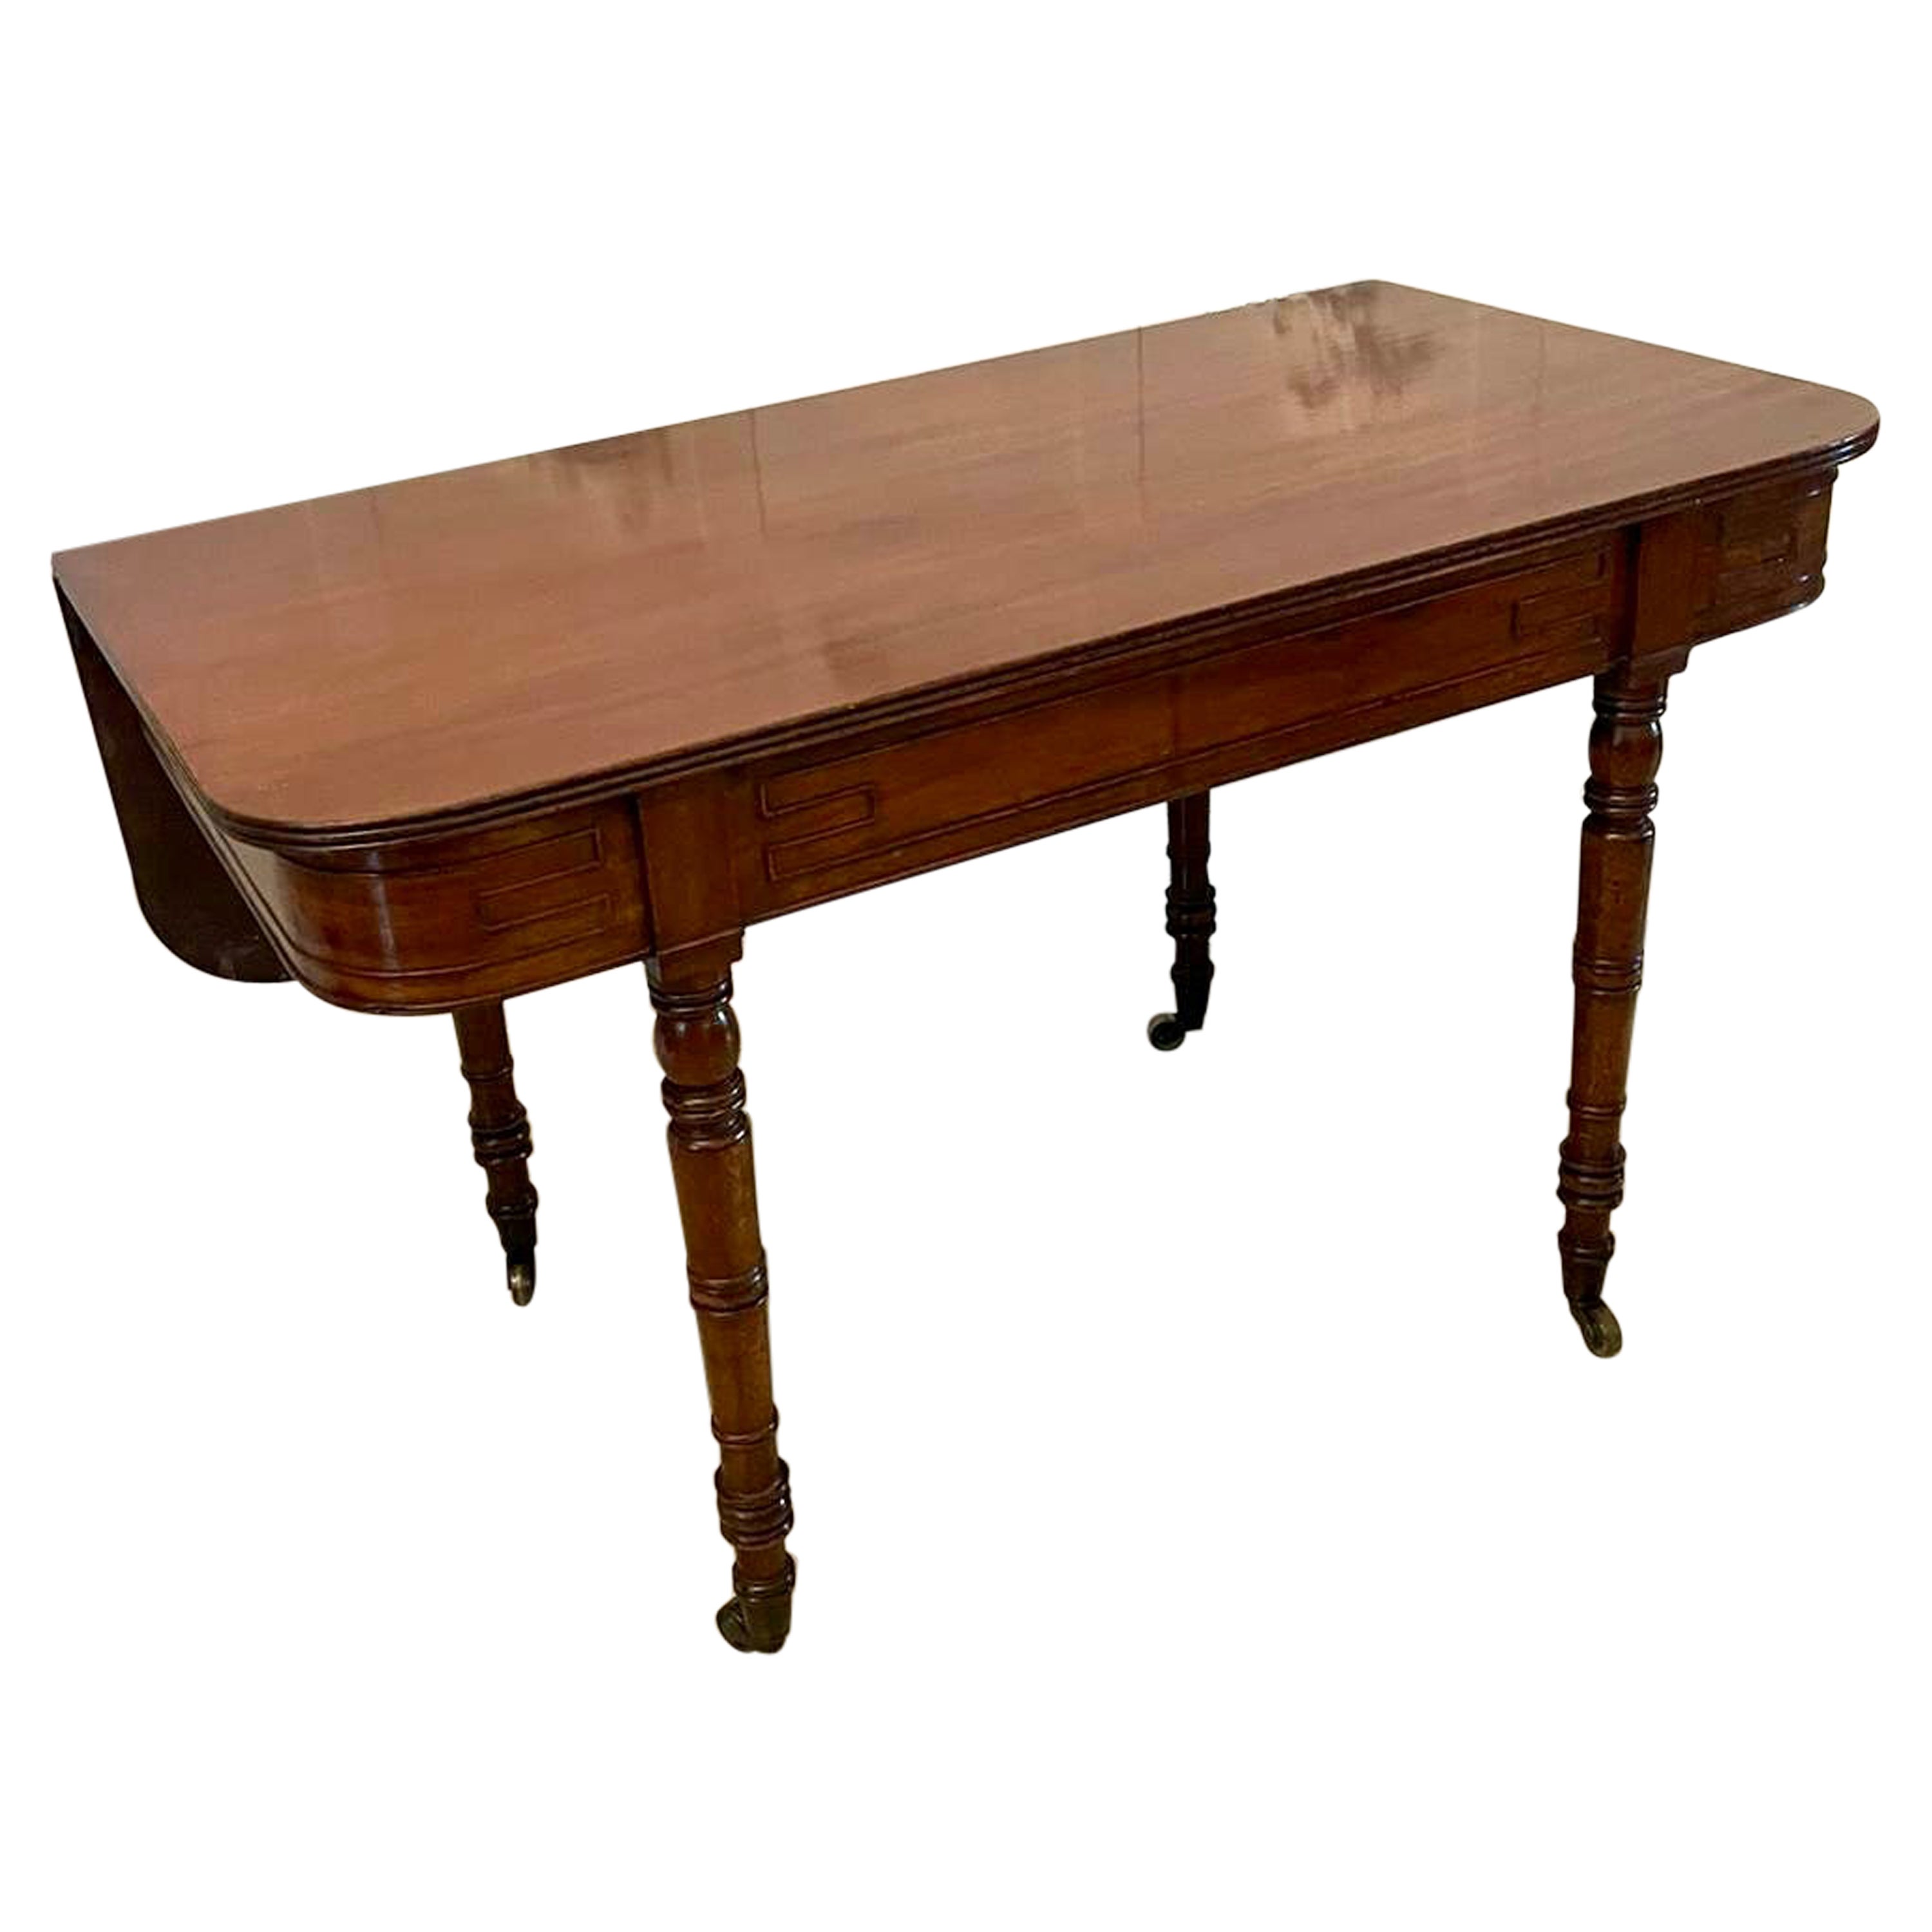 Unusual Antique George III Quality Mahogany Console Table